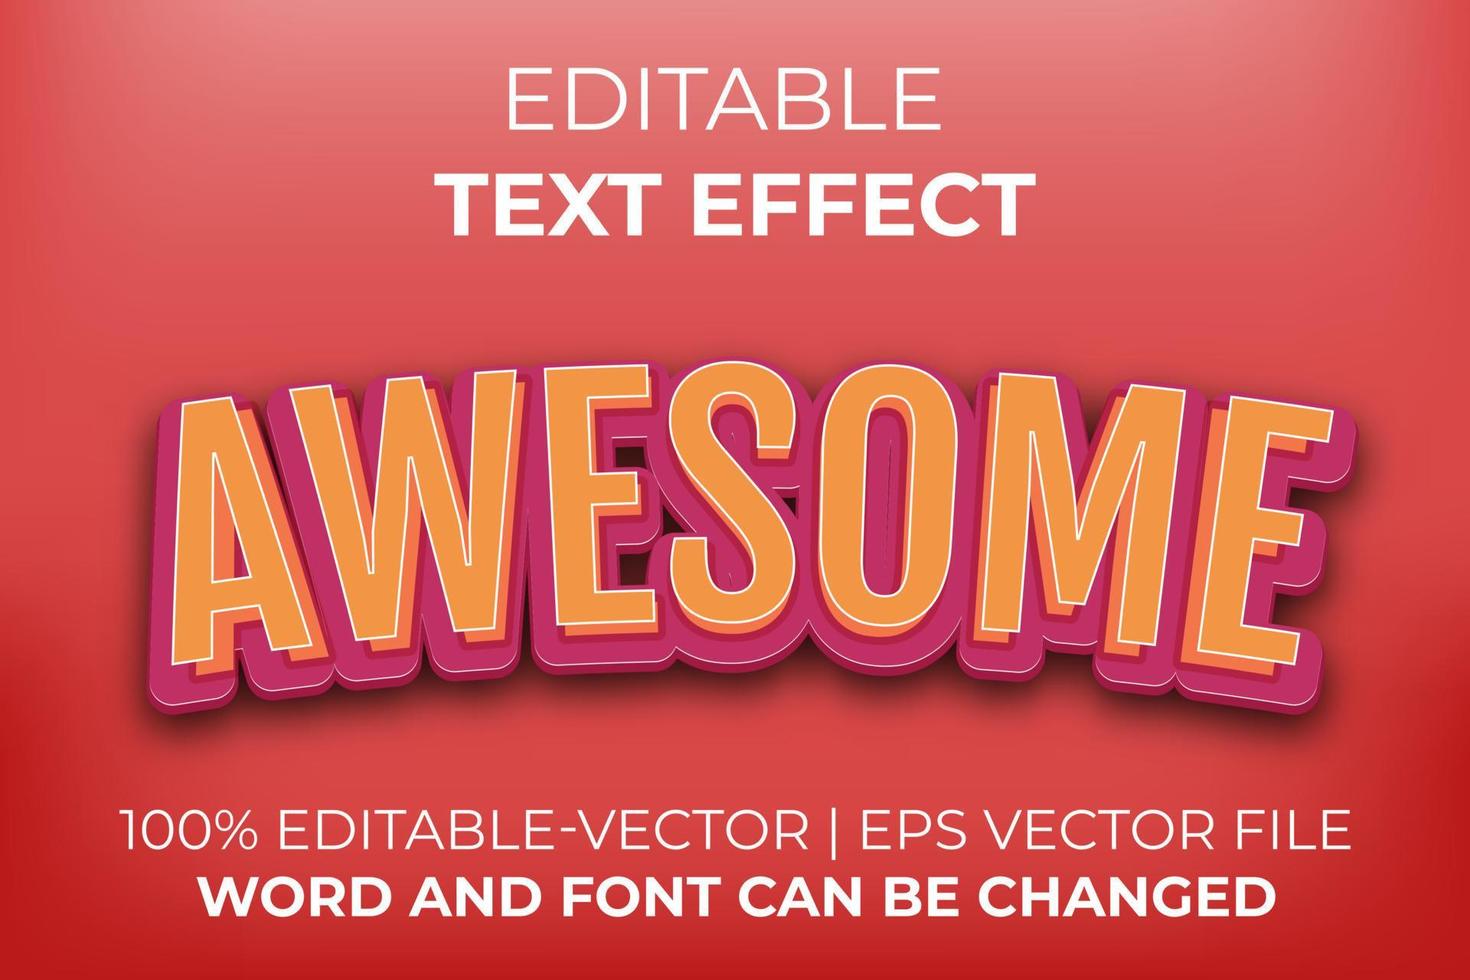 Awesome text effect, easy to edit vector